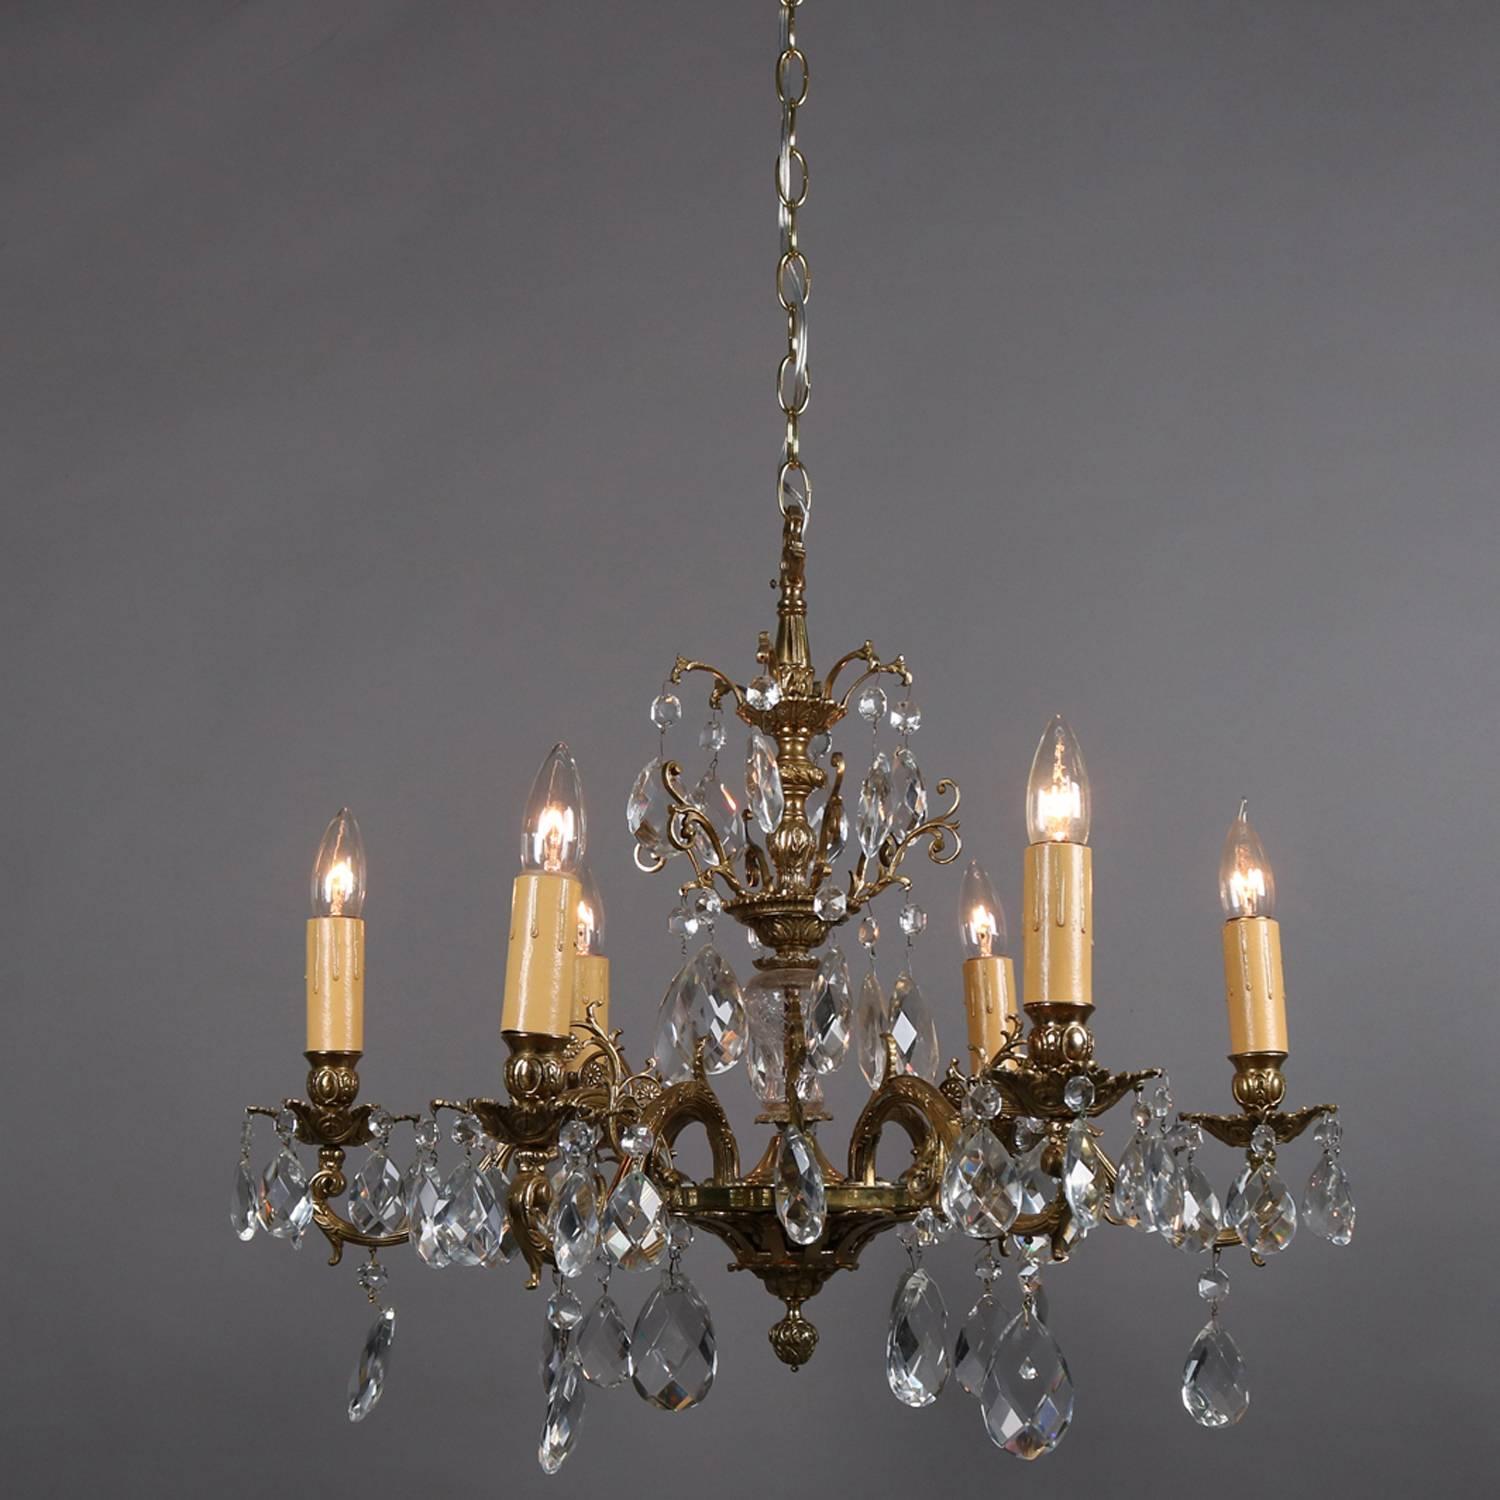 French gilt bronze chandelier features scrolled foliate and floral form frame with six arms terminating in candle lights, cut crystal prisms hung throughout, professionally re-wired, circa 1930.

Measures: fixture 24